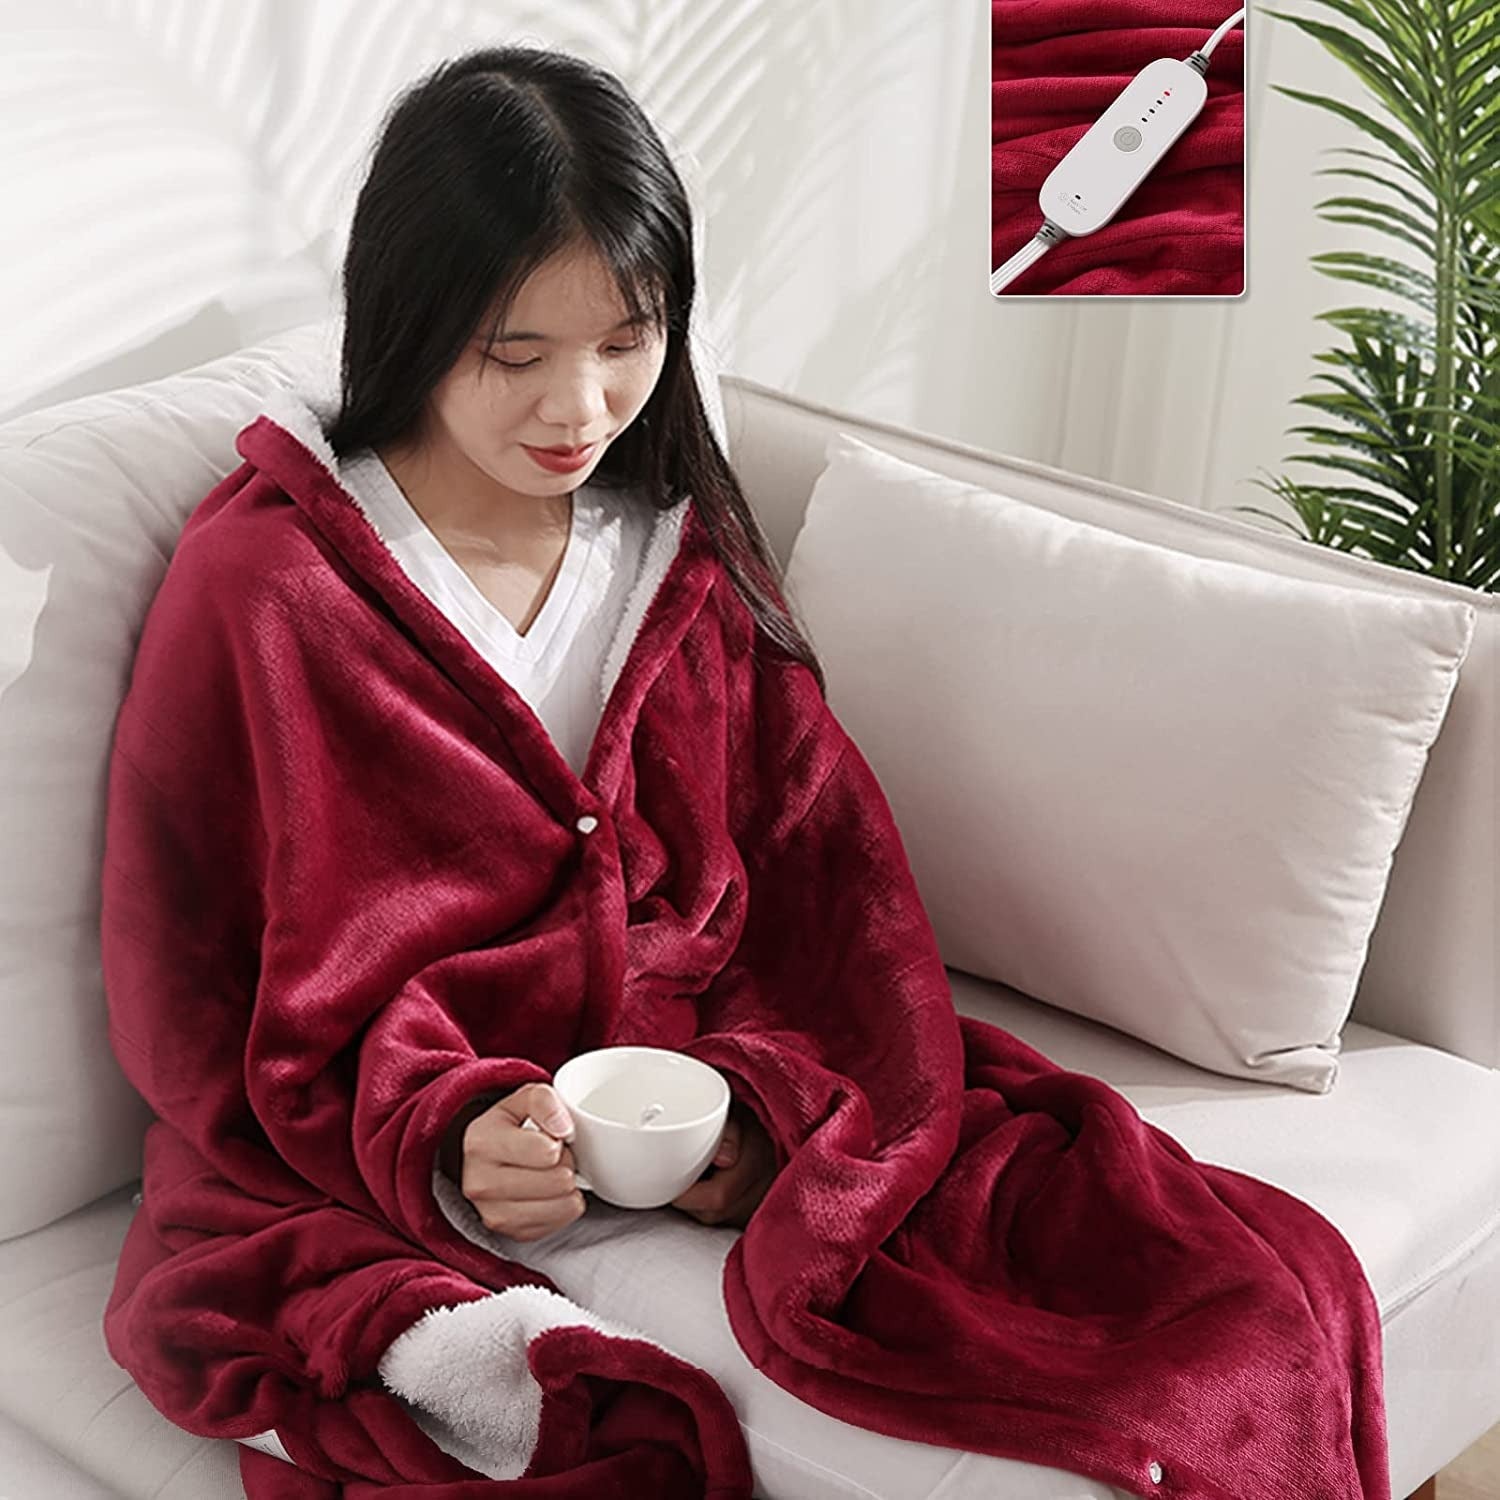 33 Cozy Products For Anyone Who Just Wants To Spend Friday Night Alone On Their Couch, Dammit